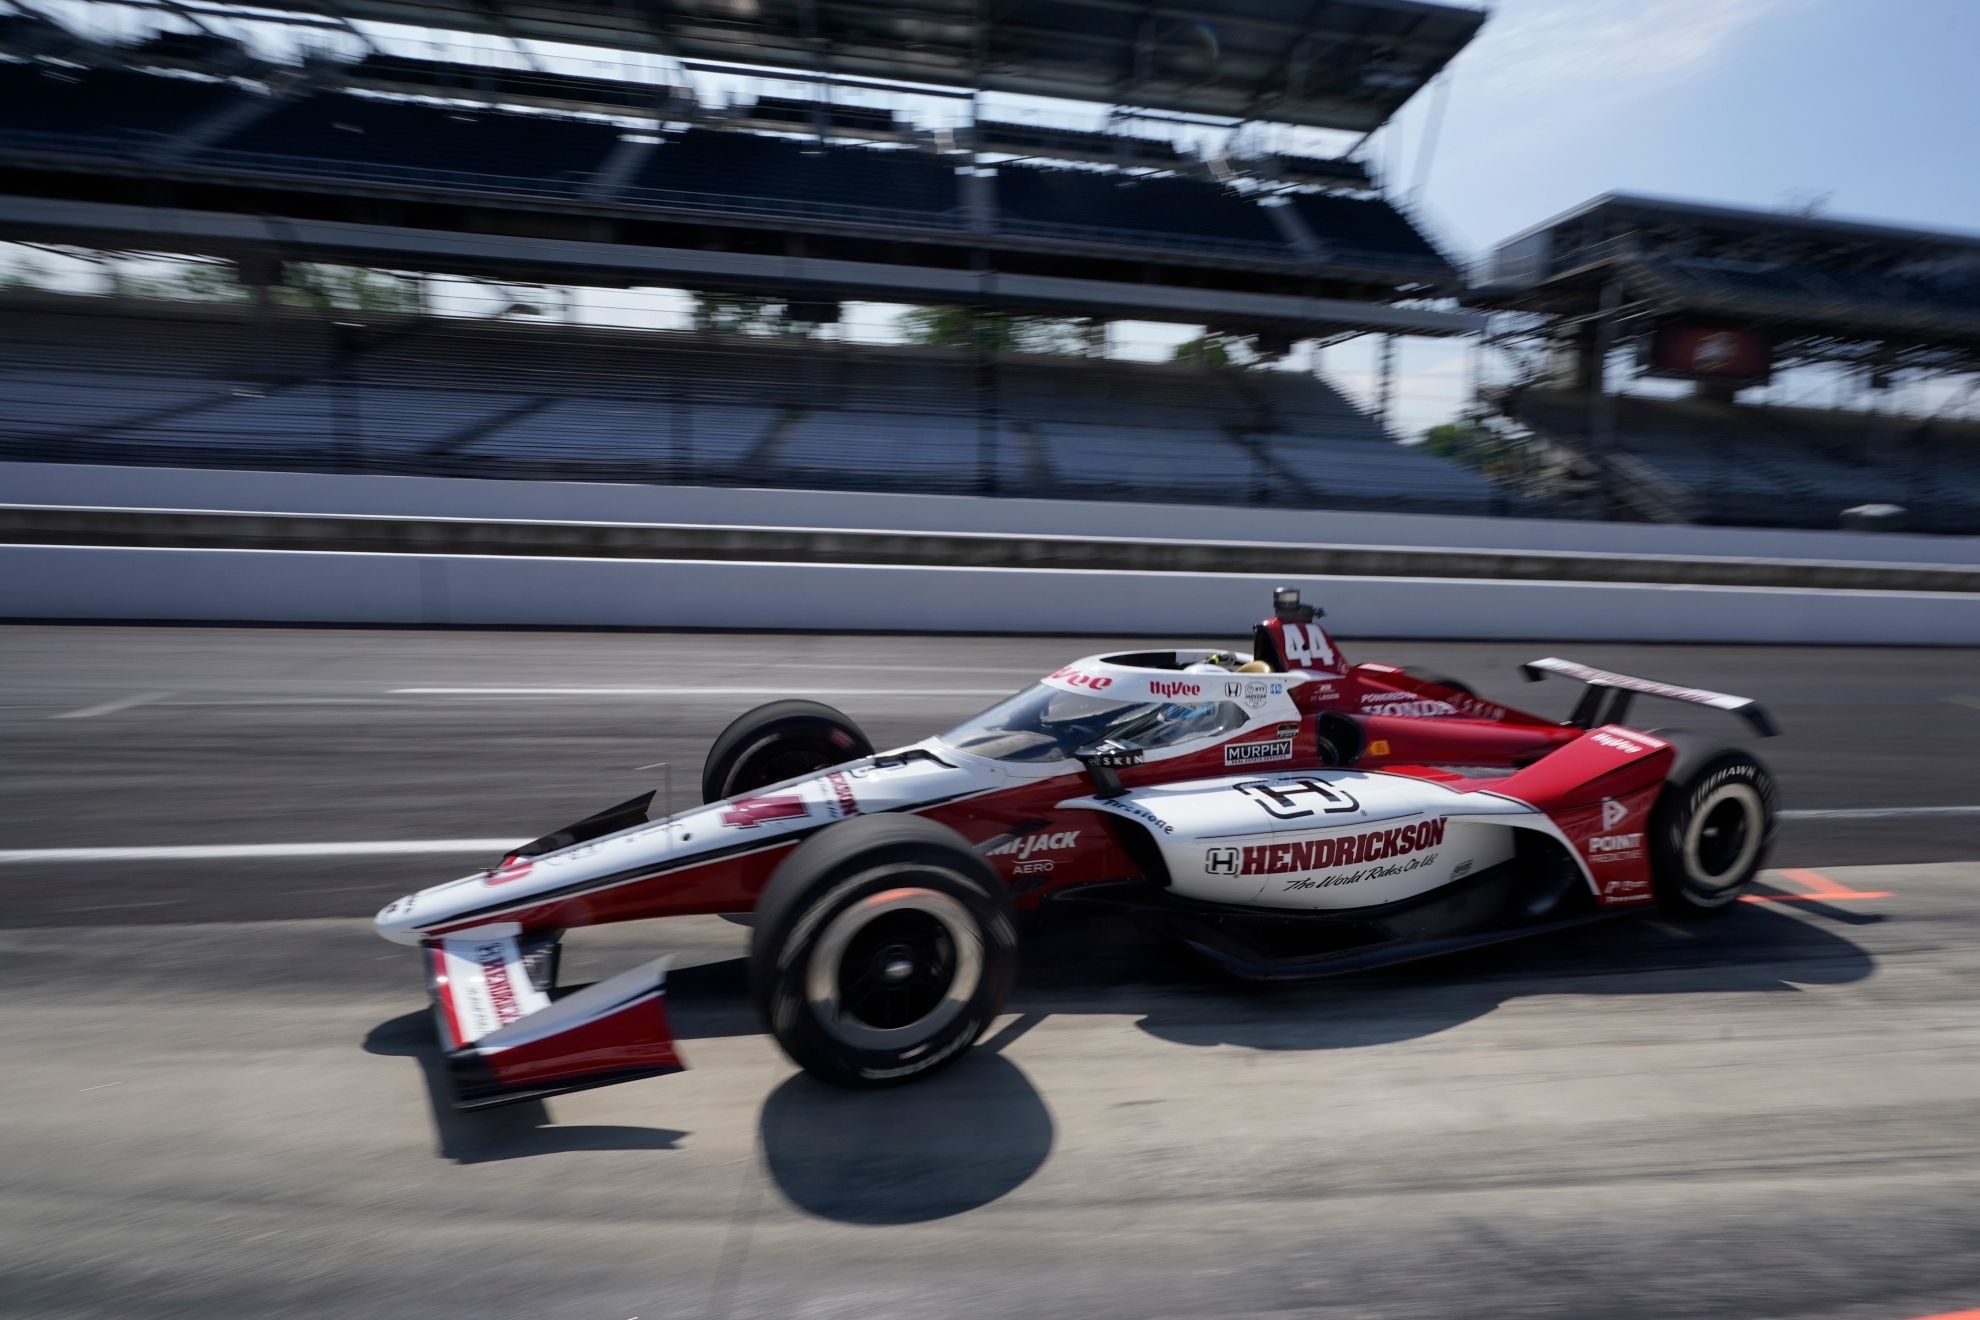 Catch all the Action as Drivers Compete for Starting Grid Positions at the 107th Indianapolis 500